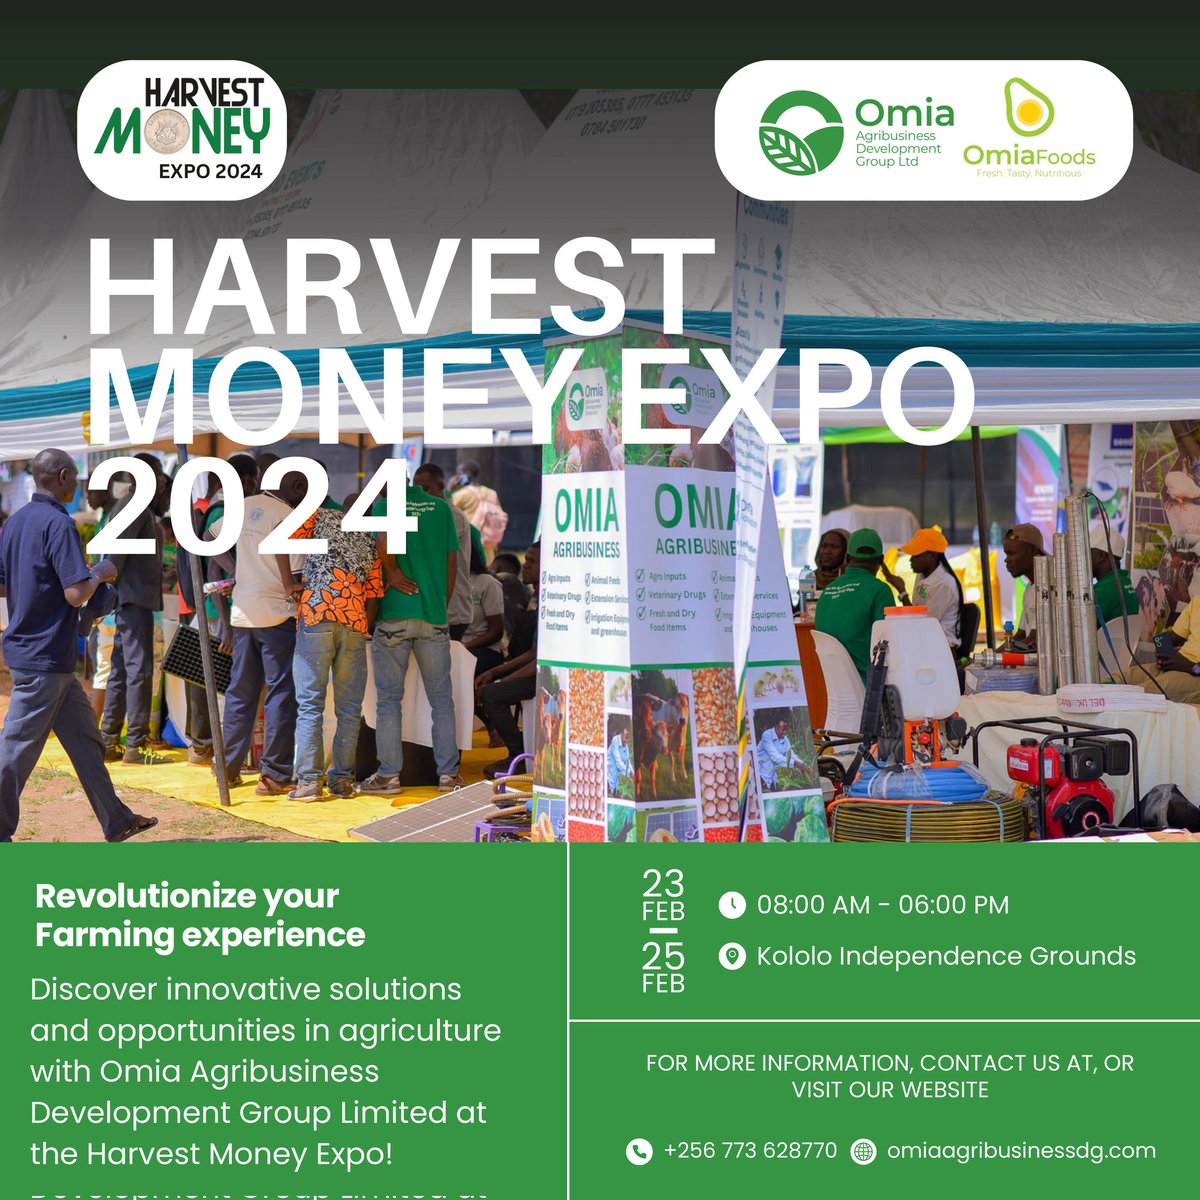 Hey there! Excited to announce our full participation at the #HarvestMoneyExpo starting today! Swing by our booth and let's dive into learning together. #FarmersFirst